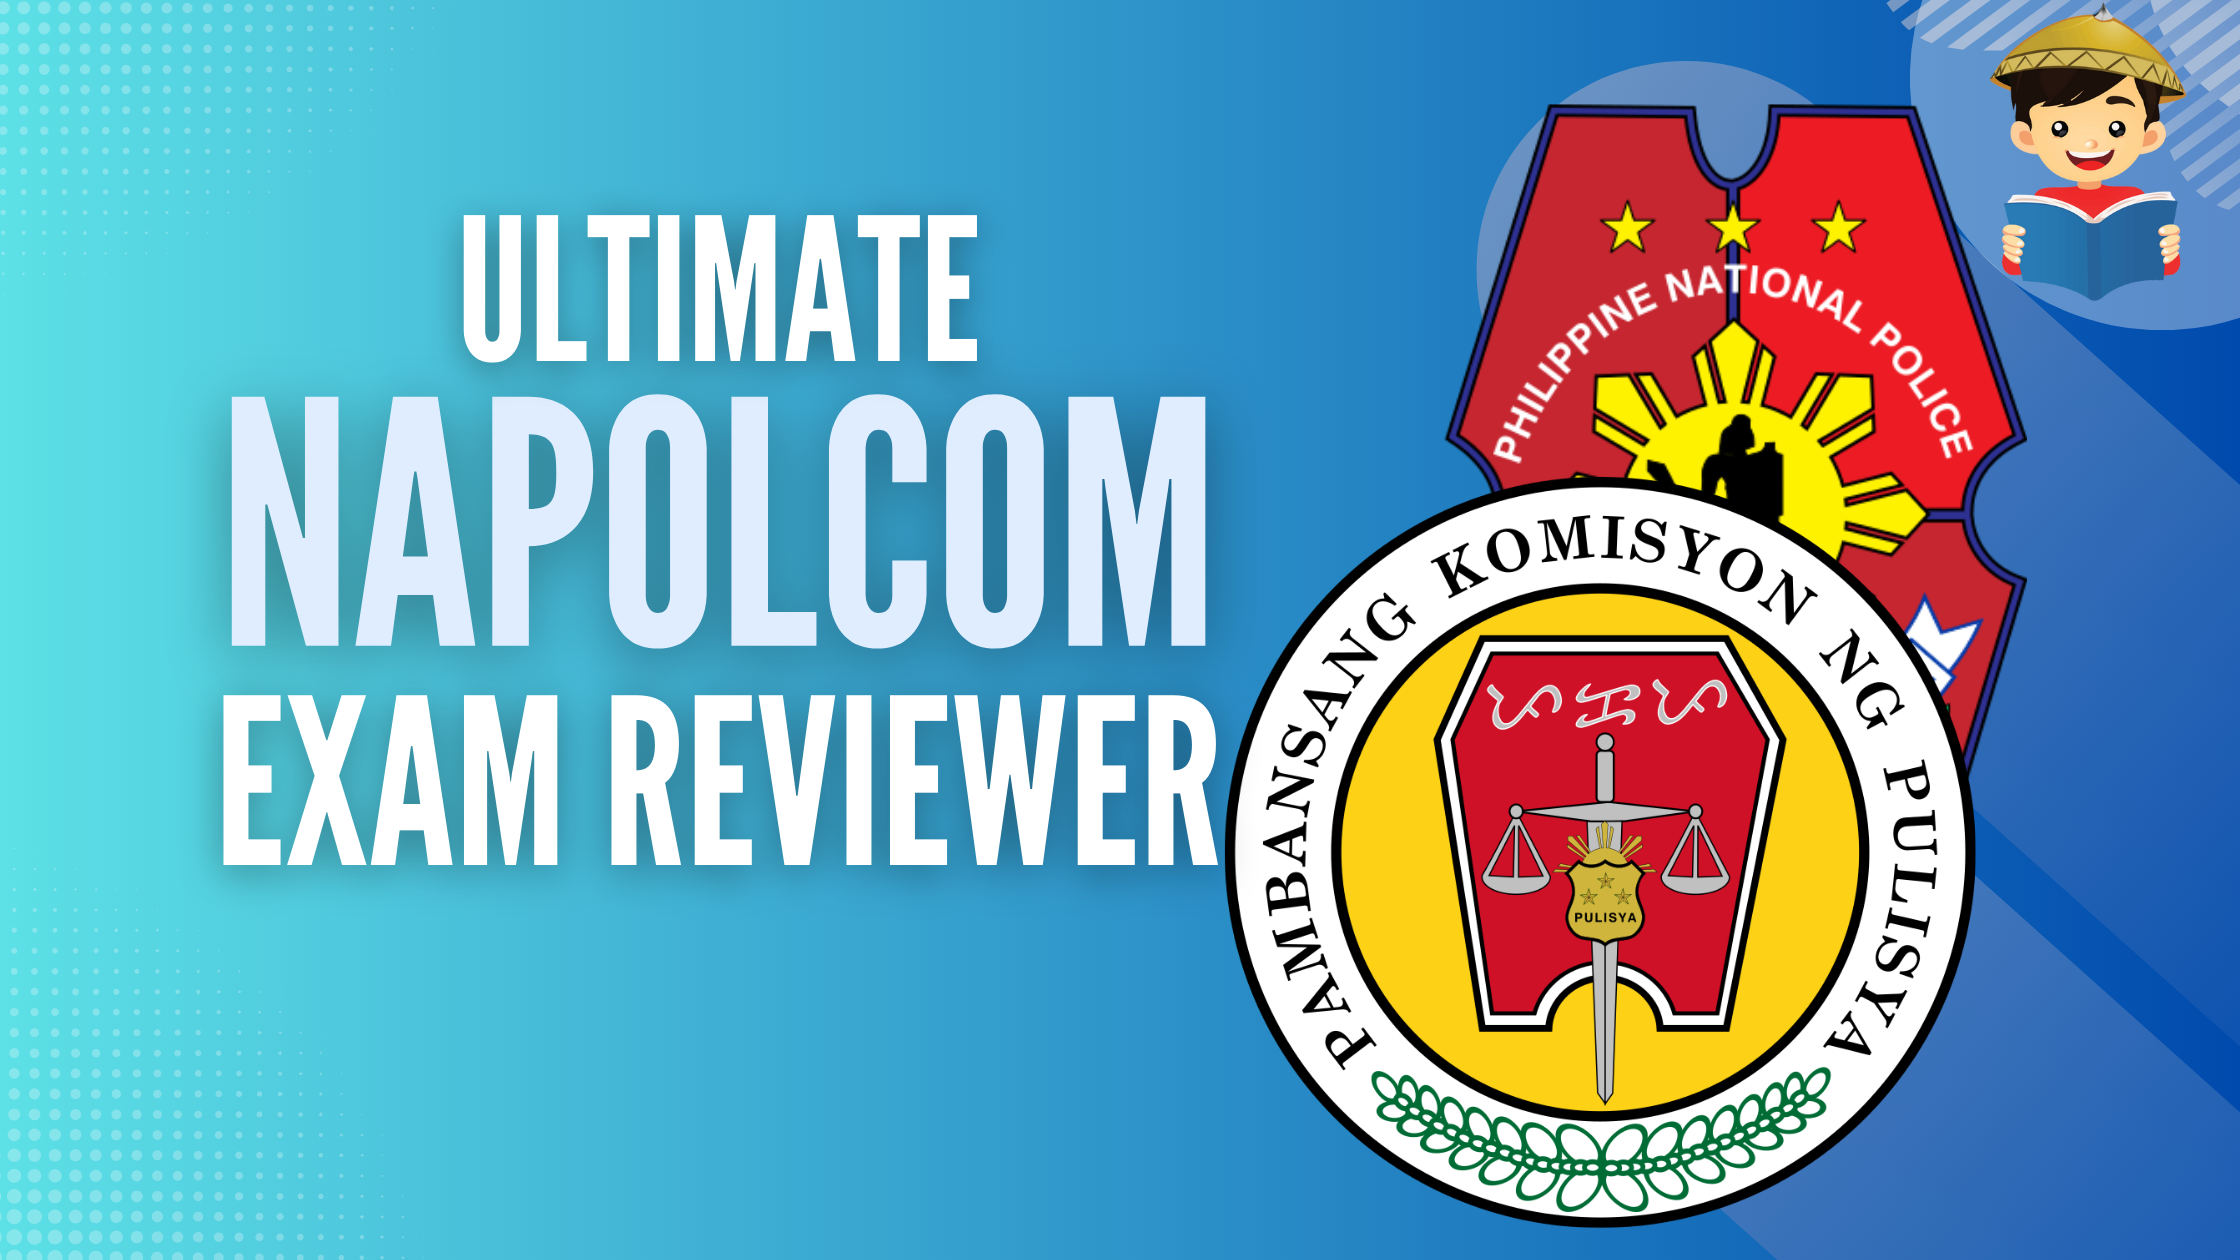 napolcom exam reviewer featured image